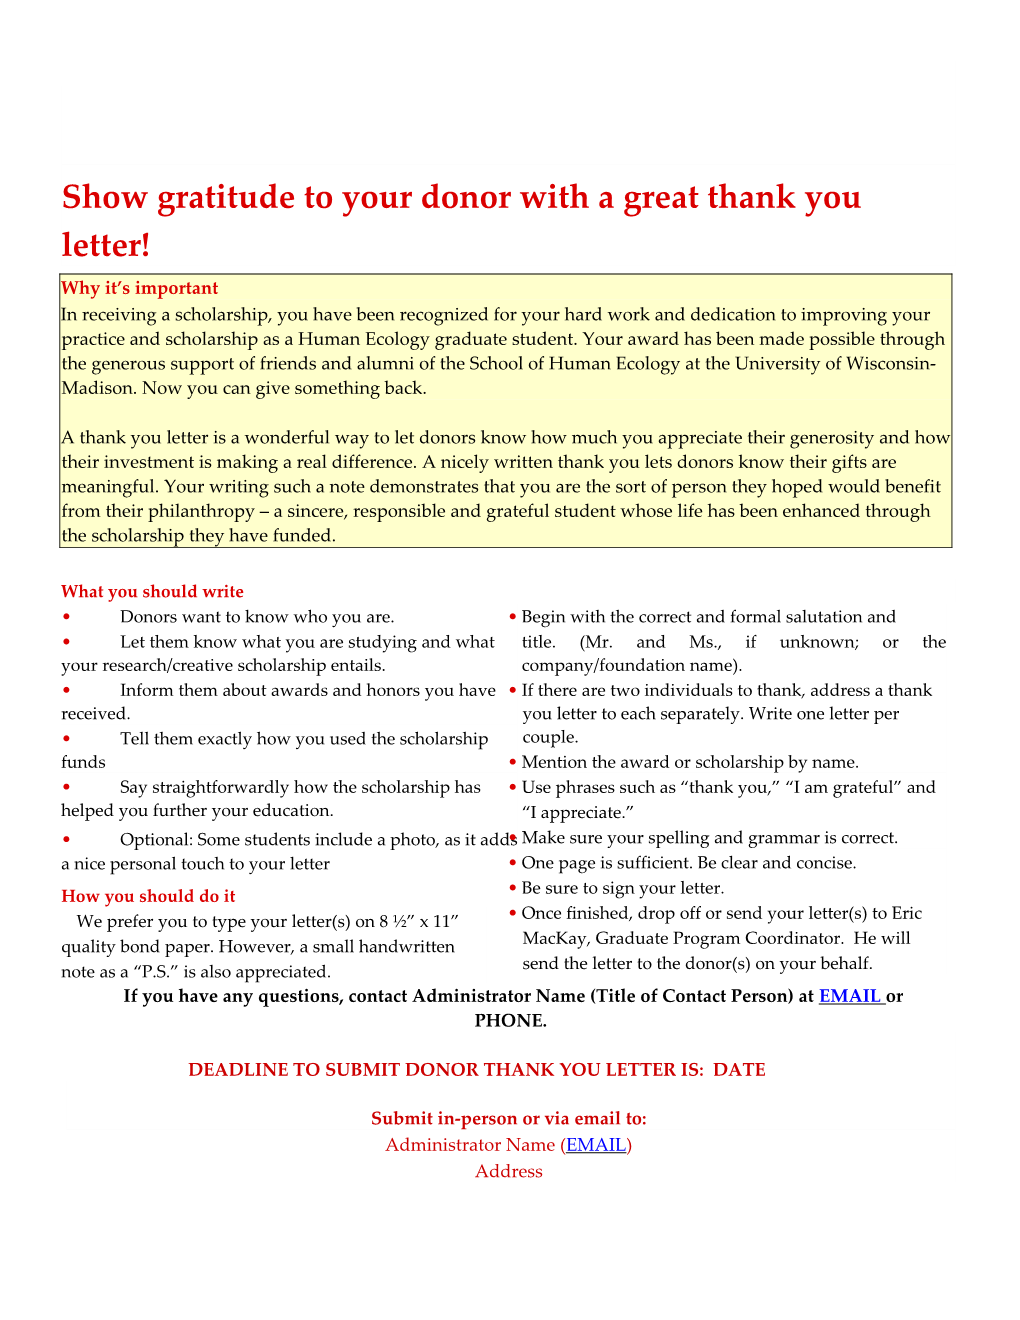 Show Gratitude to Your Donor with a Great Thank You Letter!